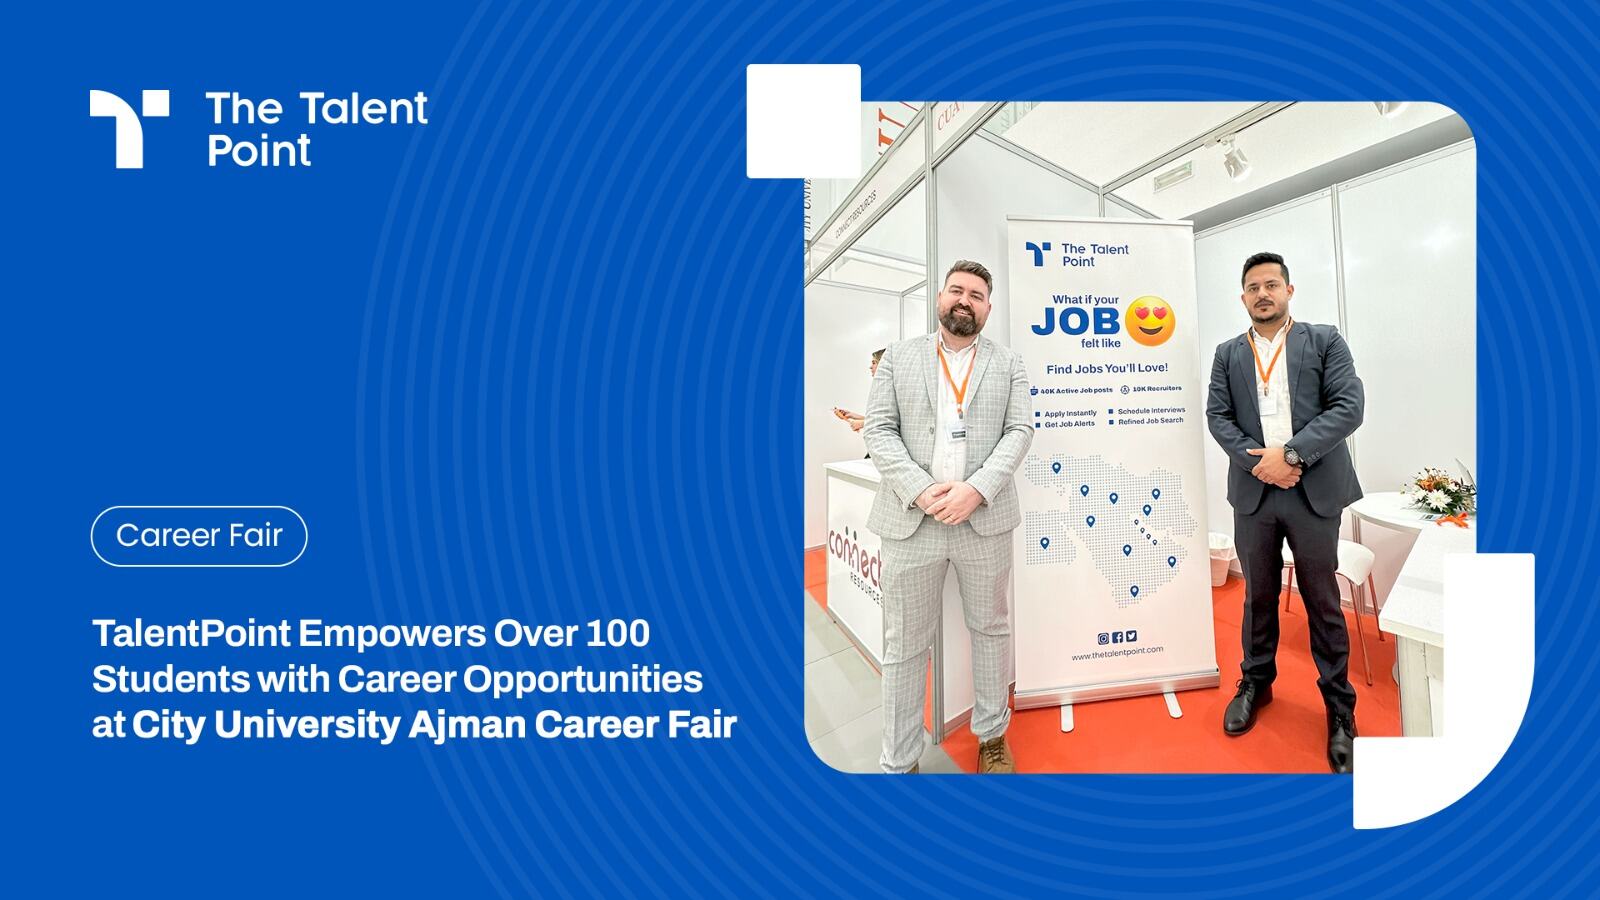 Dubai: TalentPoint Empowers Over 100 Students with Career Opportunities at City University Ajman Career Fair